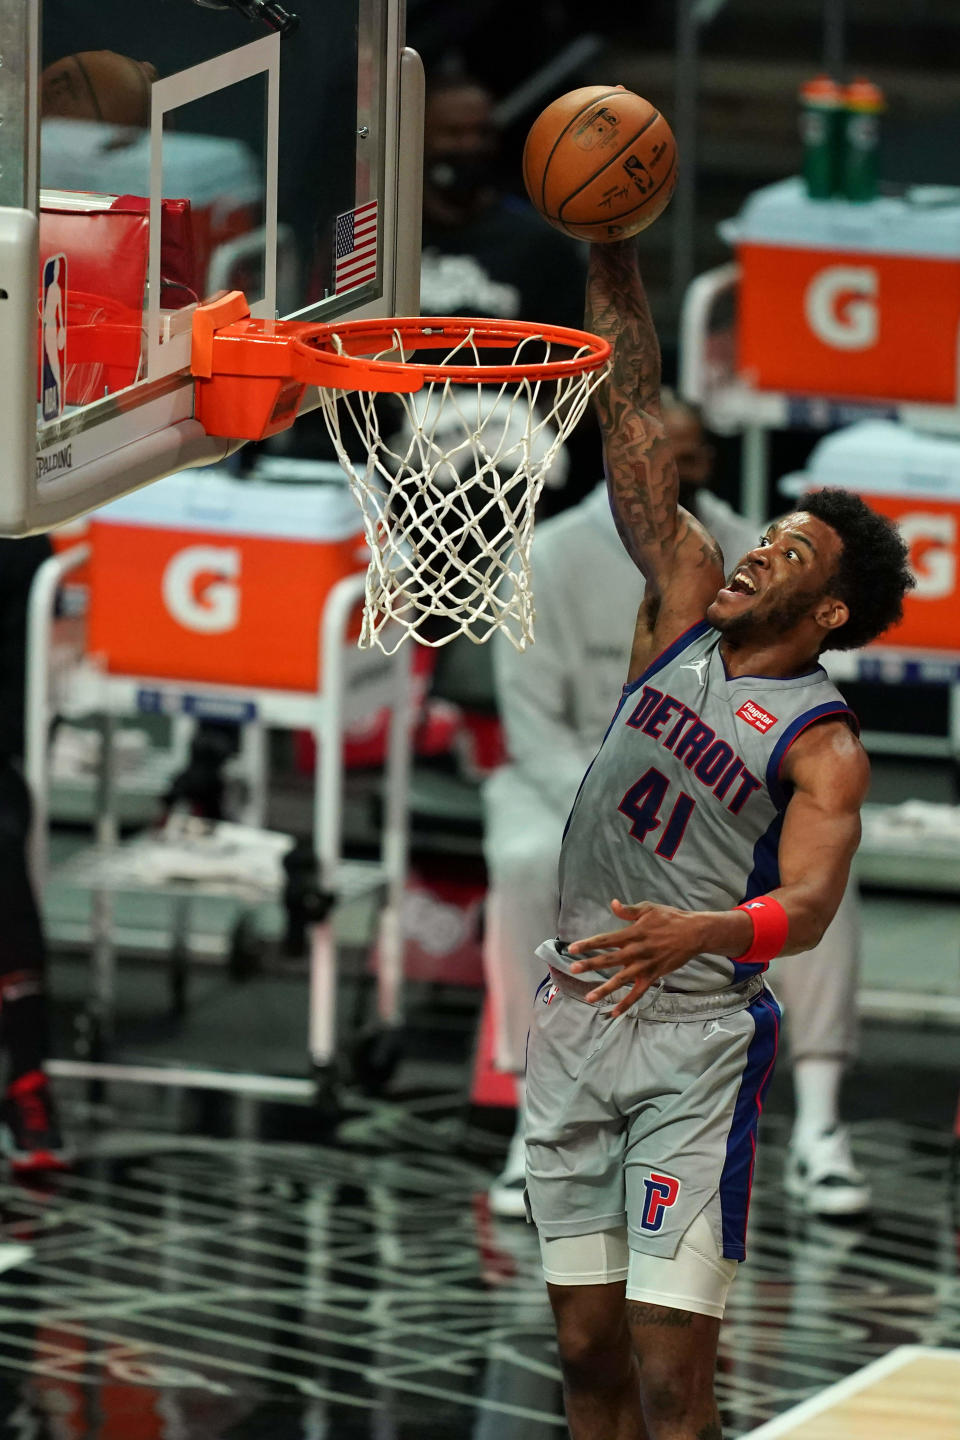 Detroit Pistons forward Saddiq Bey (41) dunks the ball against the LA Clippers in the second half April 11, 2021 at Staples Center.